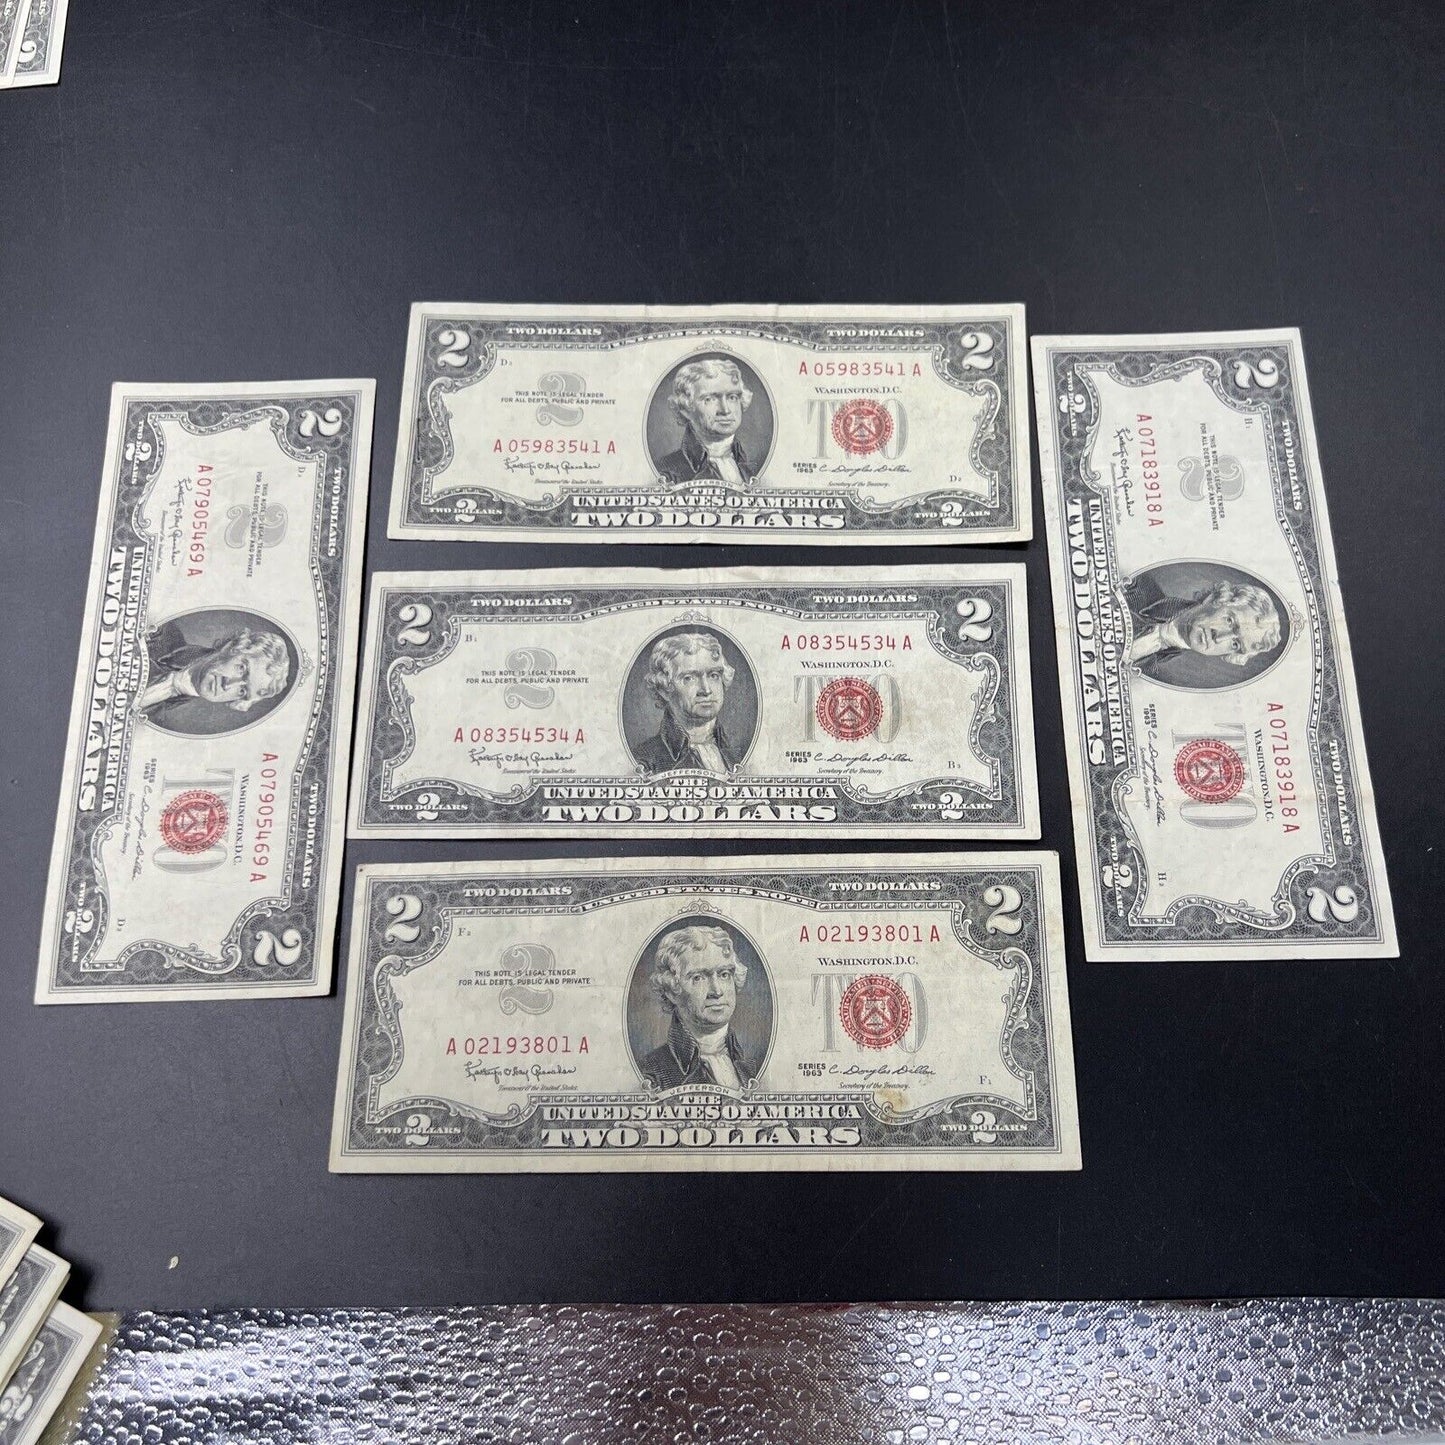 Lot of 5 1963 $2 United States Currency Legal Tender Note Red Seal Bills Fine +